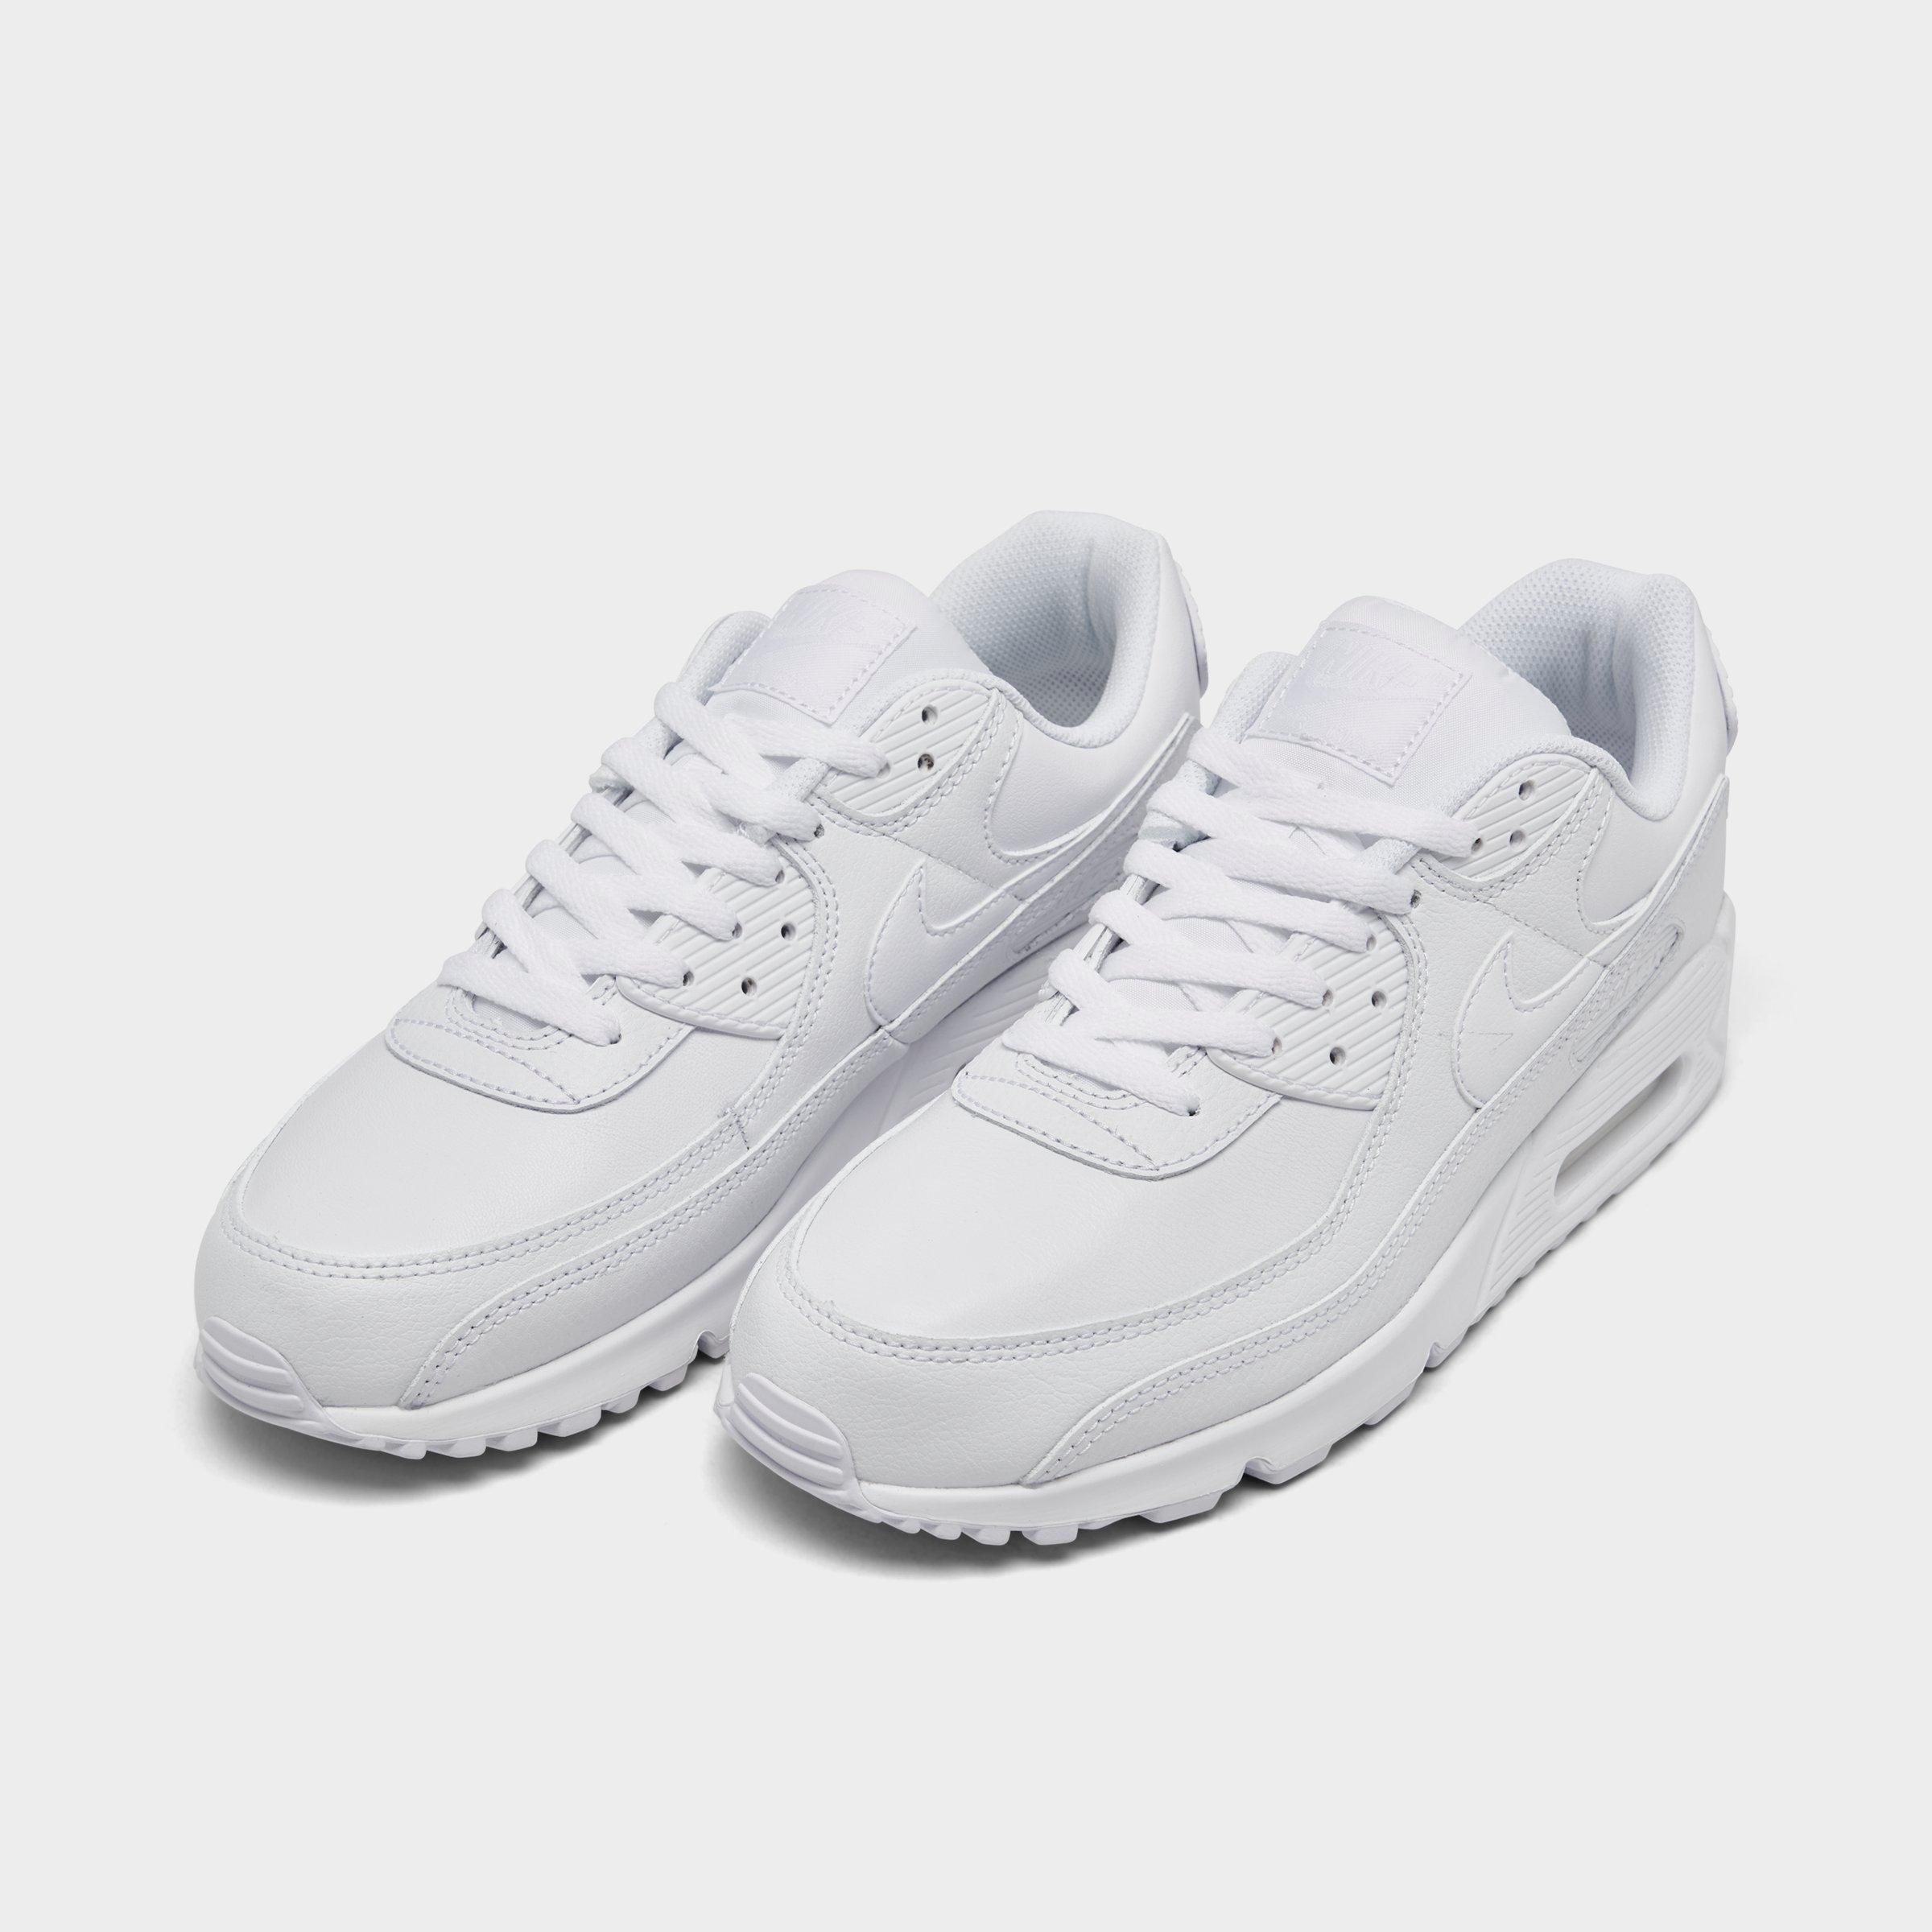 all leather air max 90 white